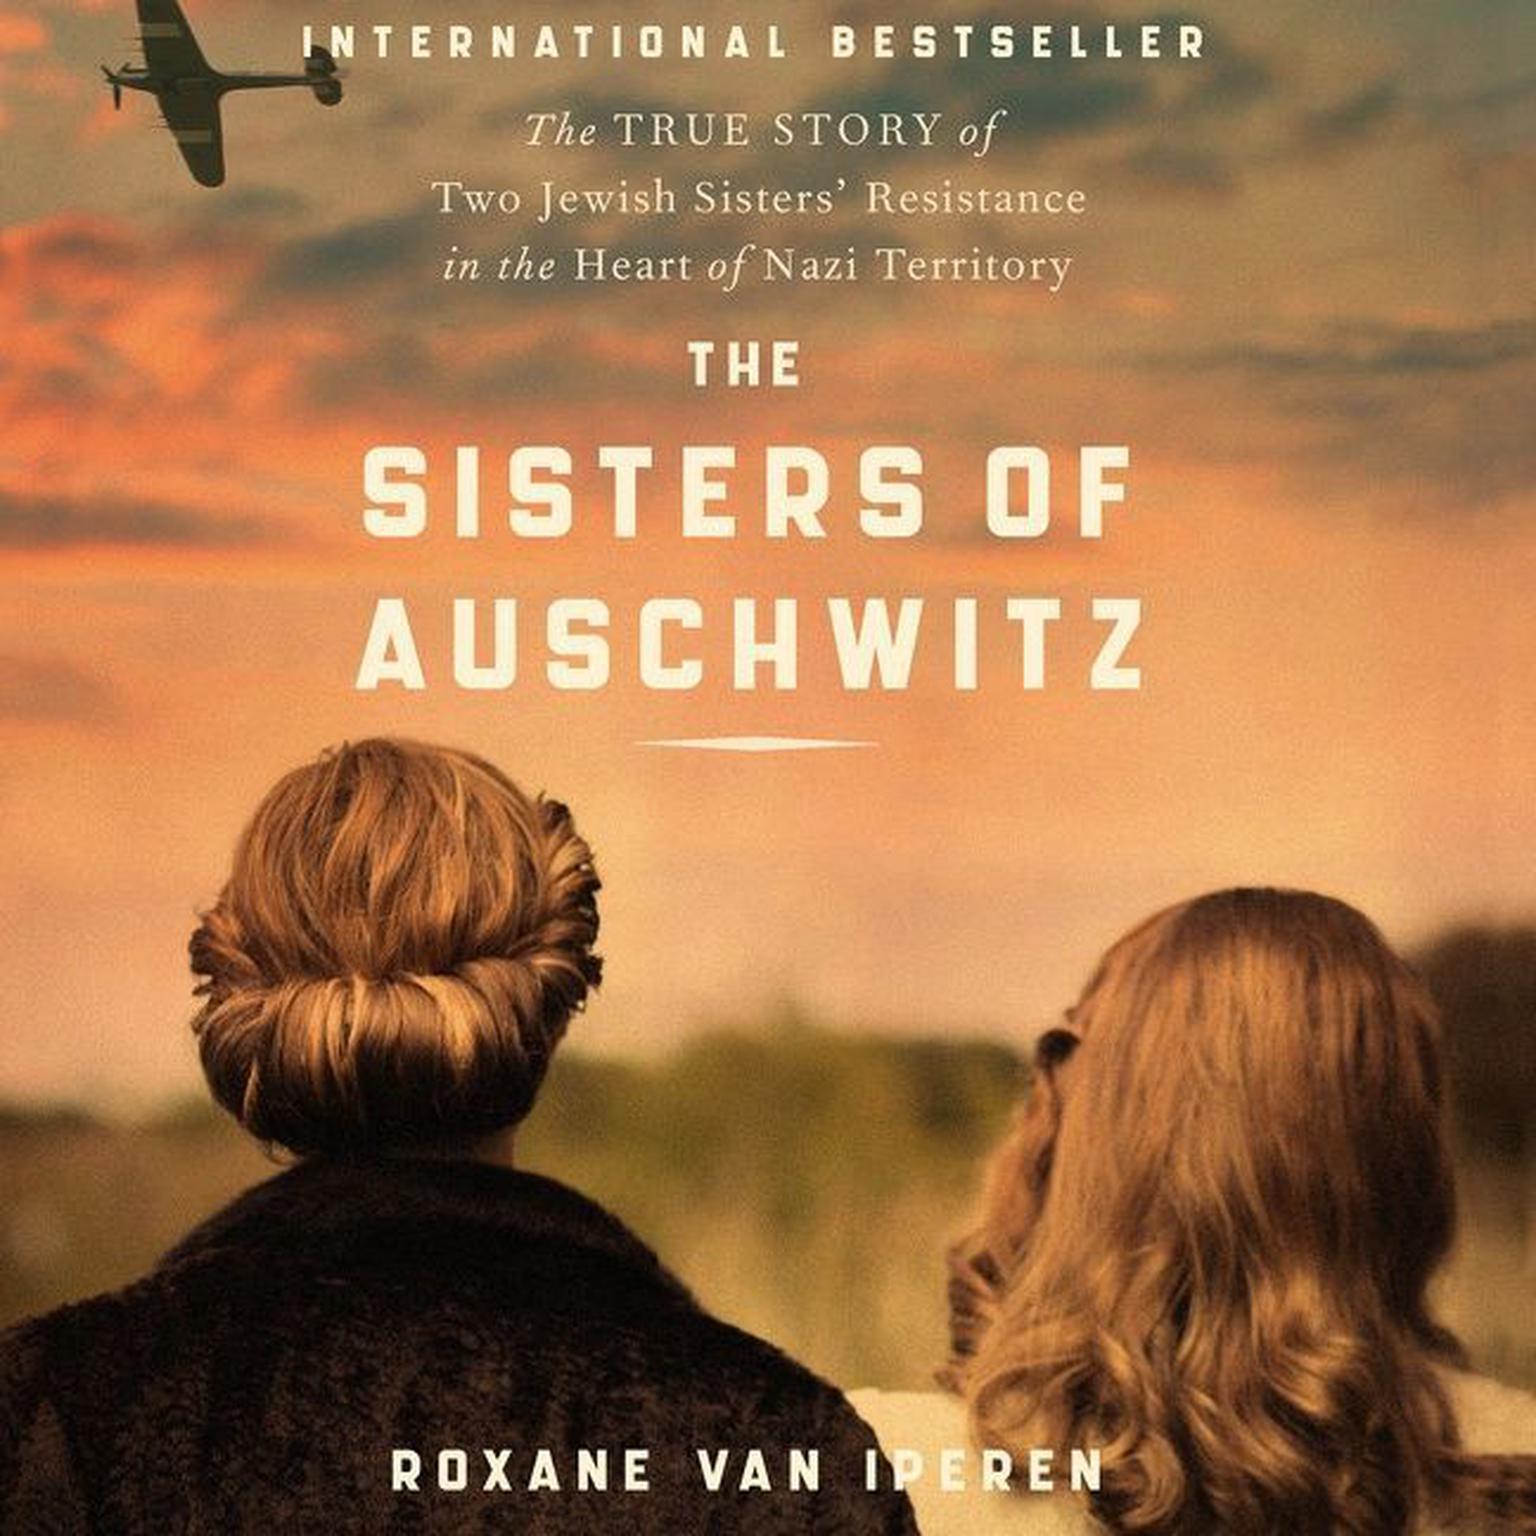 The Sisters of Auschwitz: The True Story of Two Jewish Sisters’ Resistance in the Heart of Nazi Territory Audiobook, by Roxane van Iperen